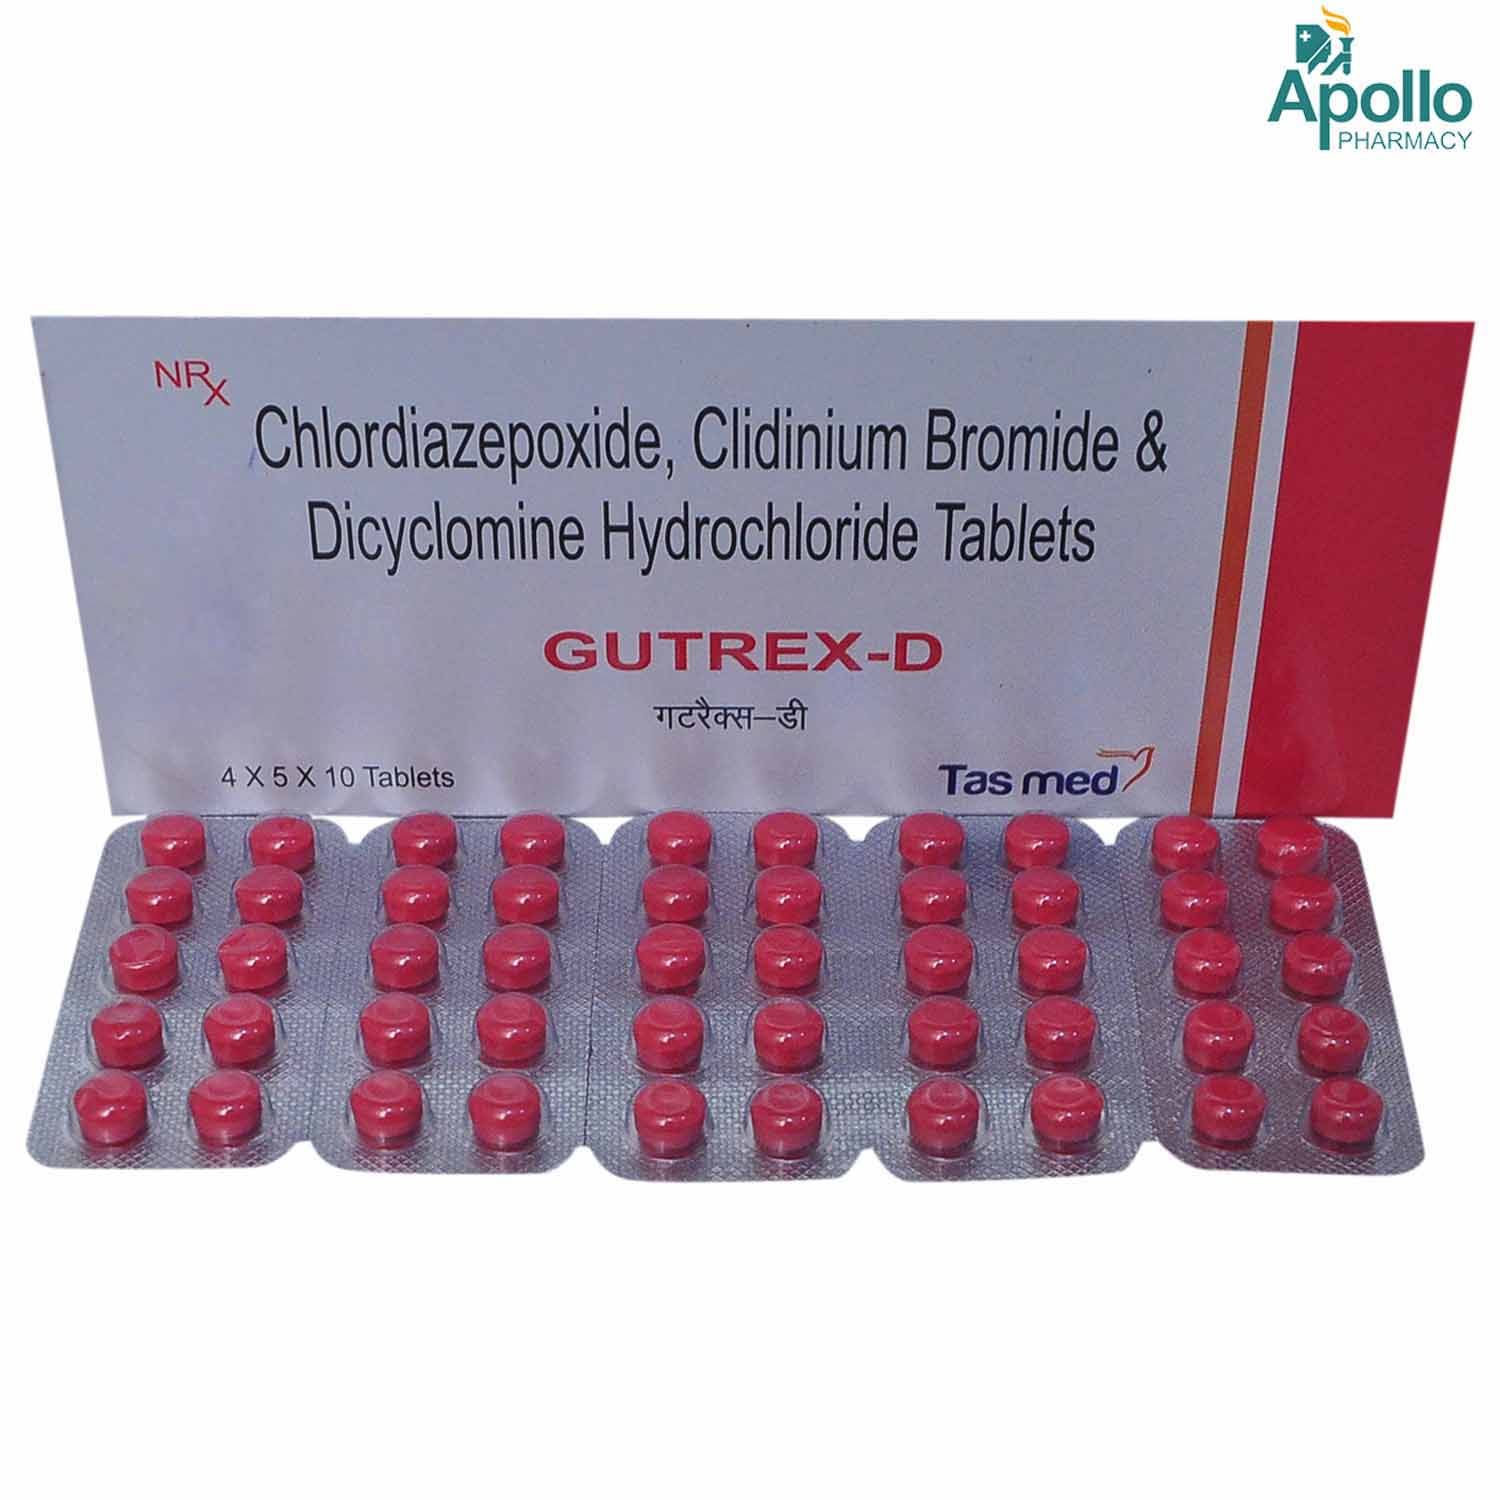 Gutrex D Tablet Price Uses Side Effects Composition Apollo 24 7